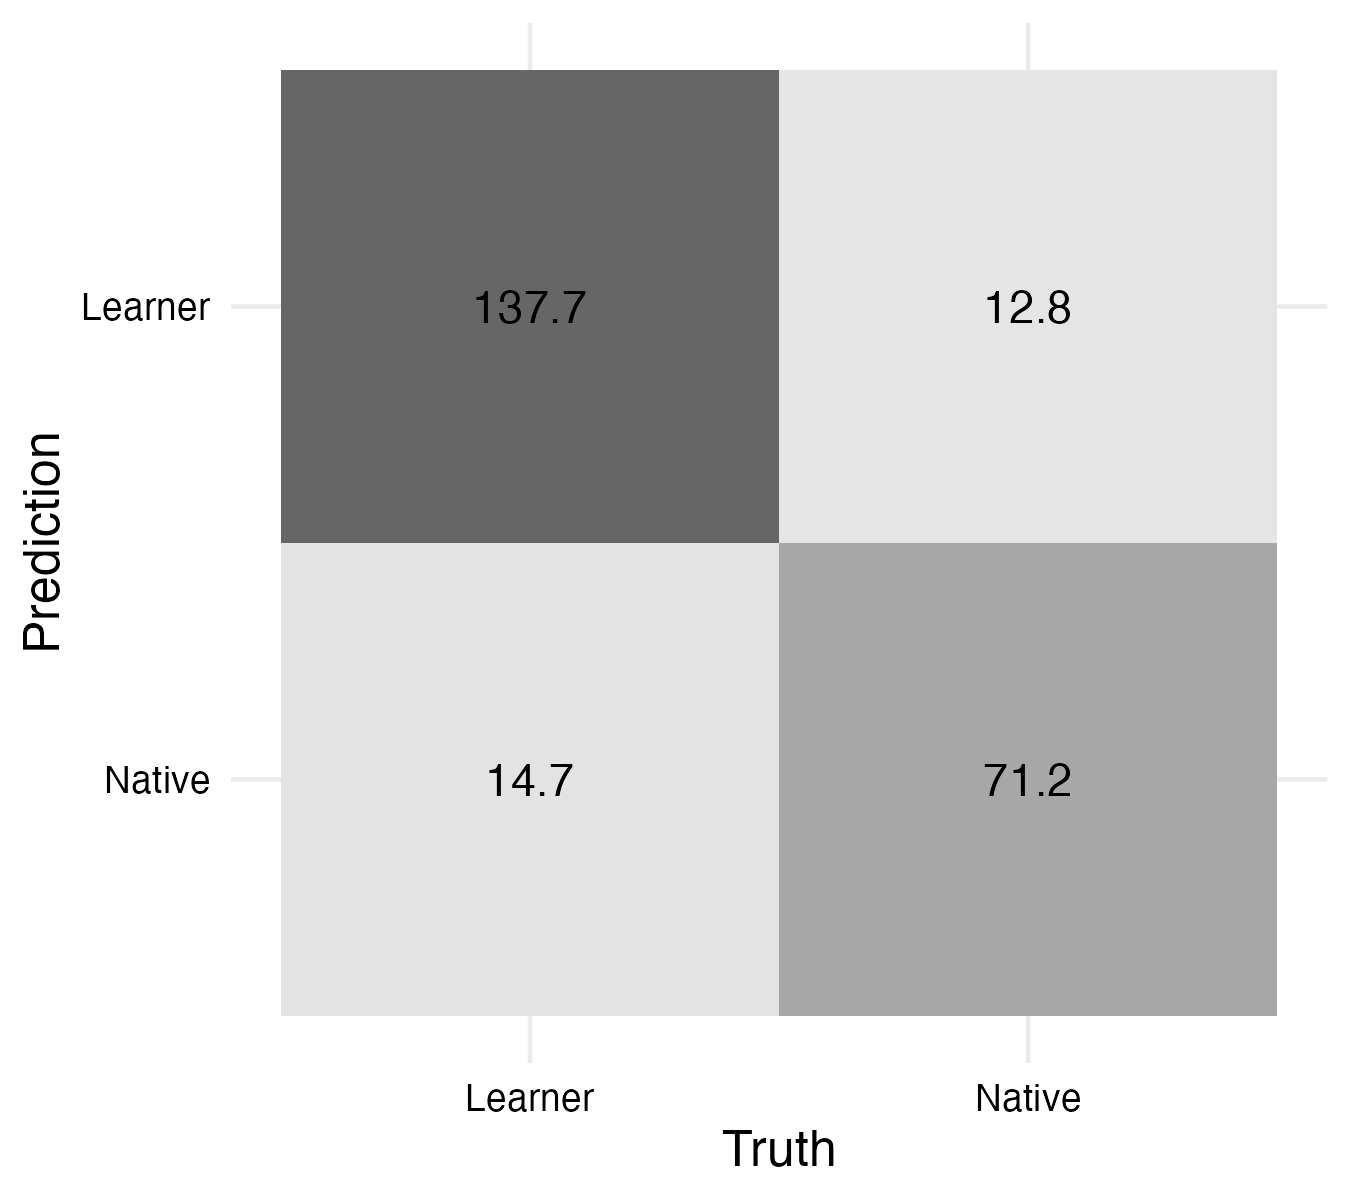 Heatmap of the confusion matrix for the aggregated folds of the cross-validation. Actual classes are on the y-axis and predicted classes are on the x-axis.